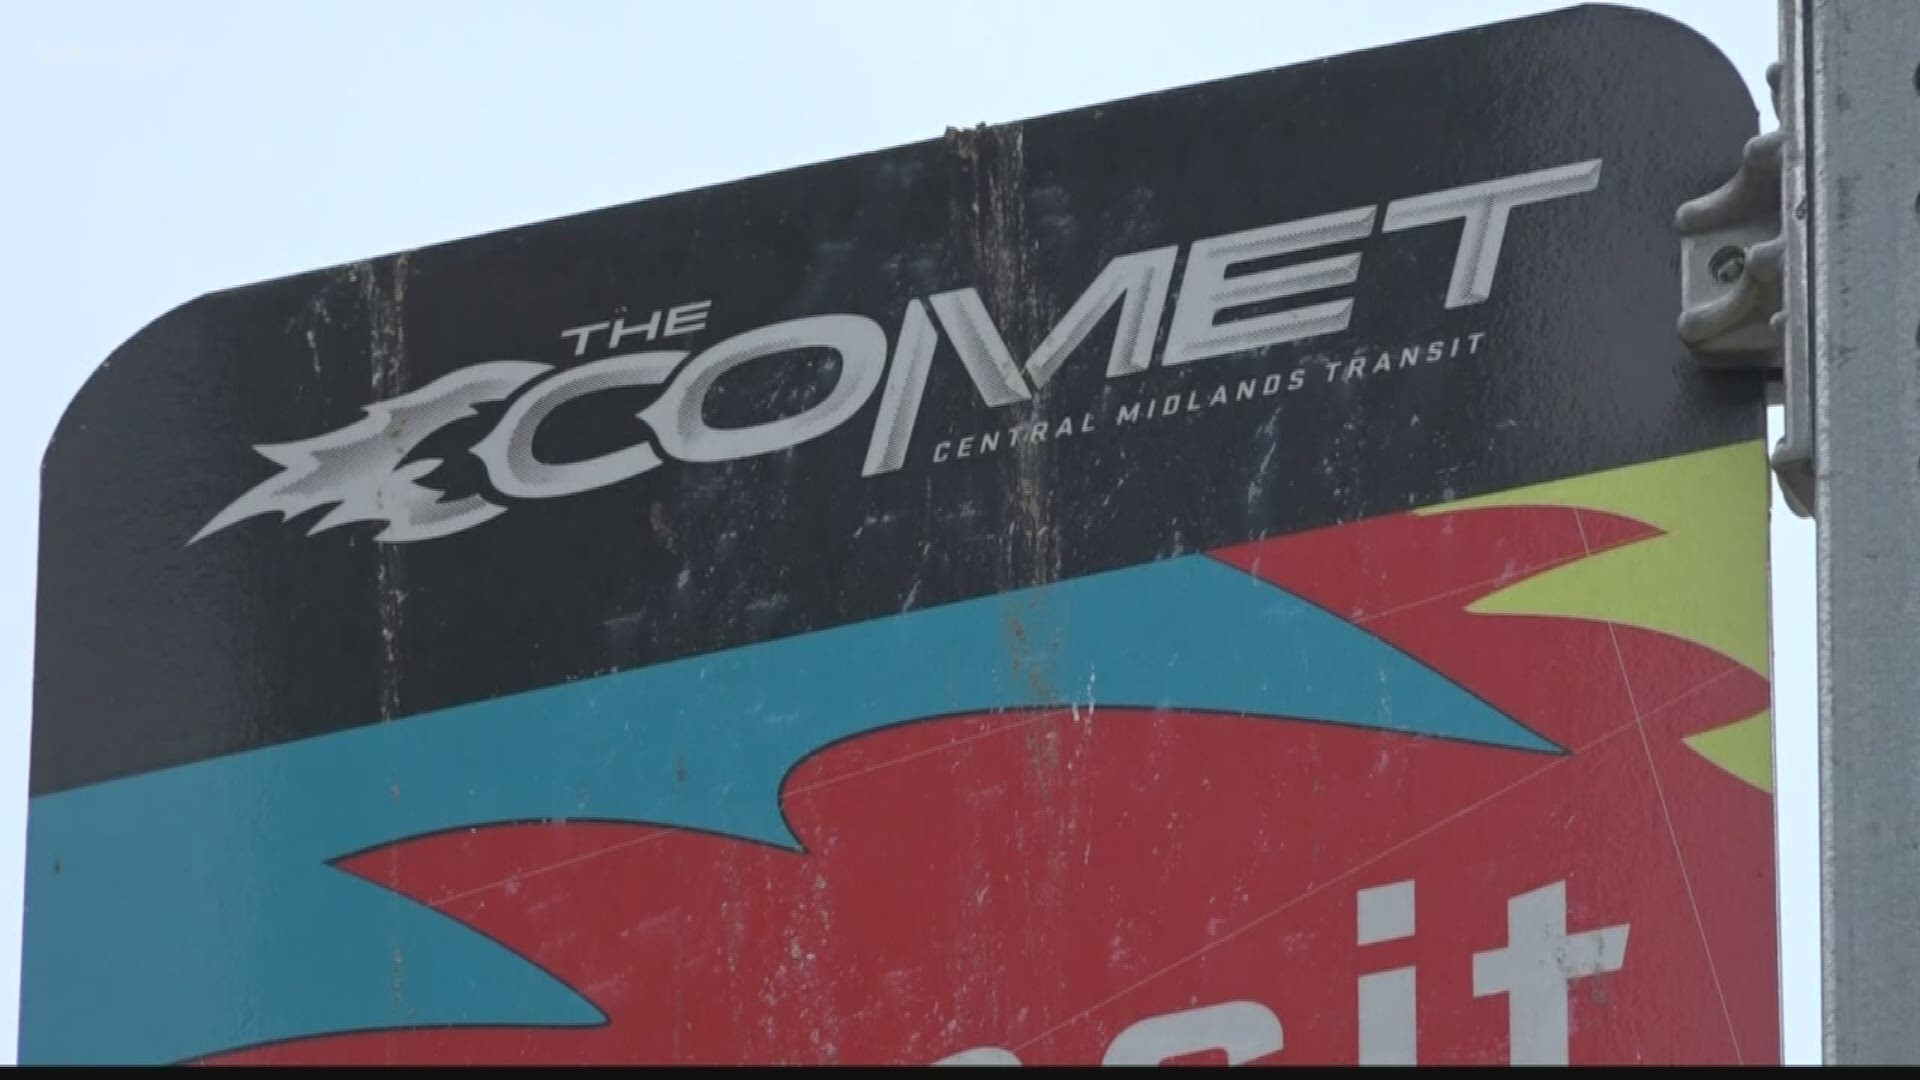 All students, employees and faculty in Lexington-Richland 5 can ride the Comet for free, just show your ID